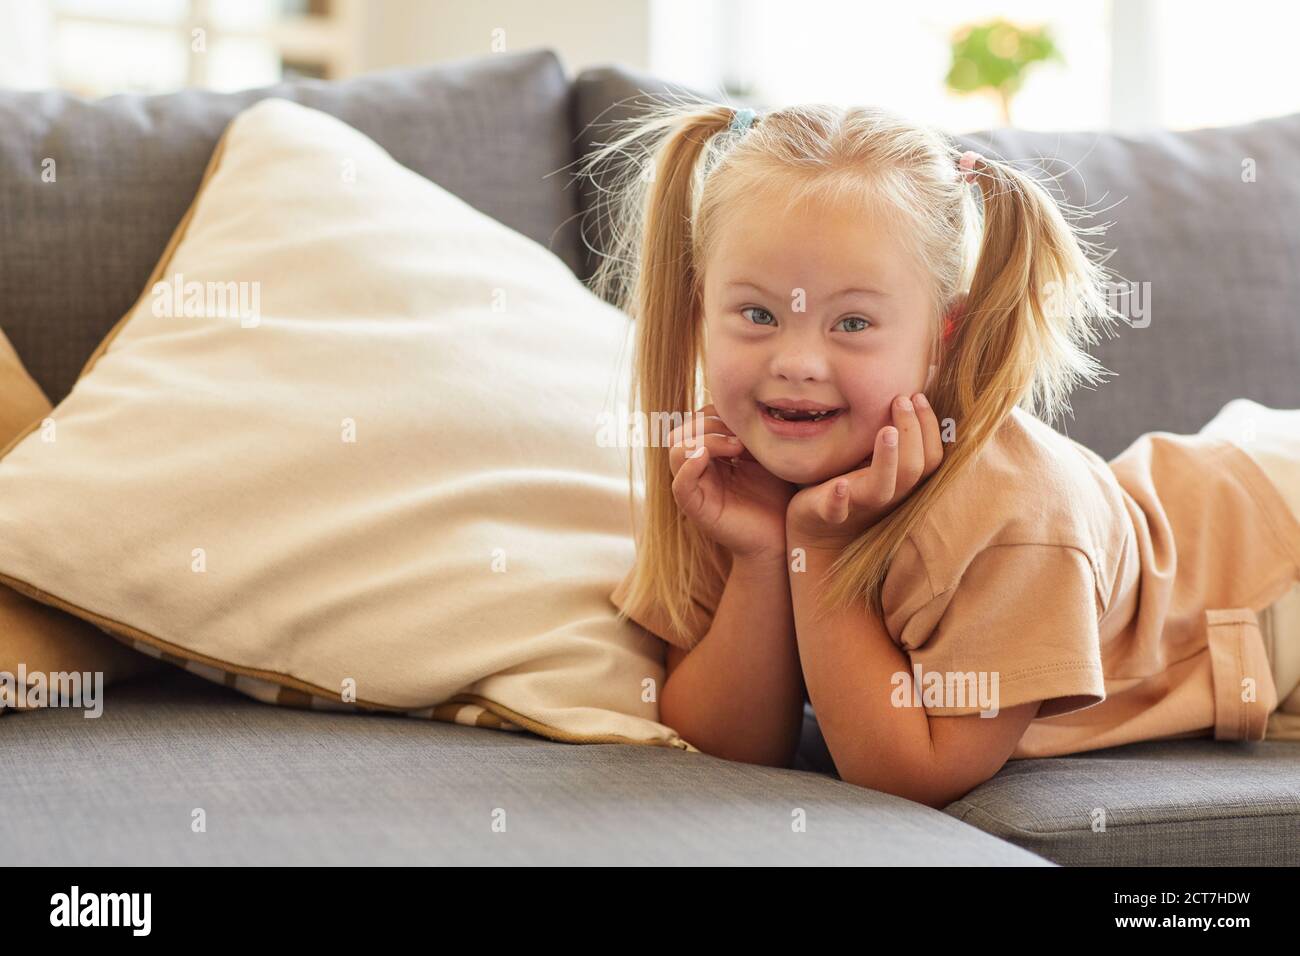 Portrait of cute girl with down syndrome smiling happily at camera while lying on sofa at home, copy space Stock Photo